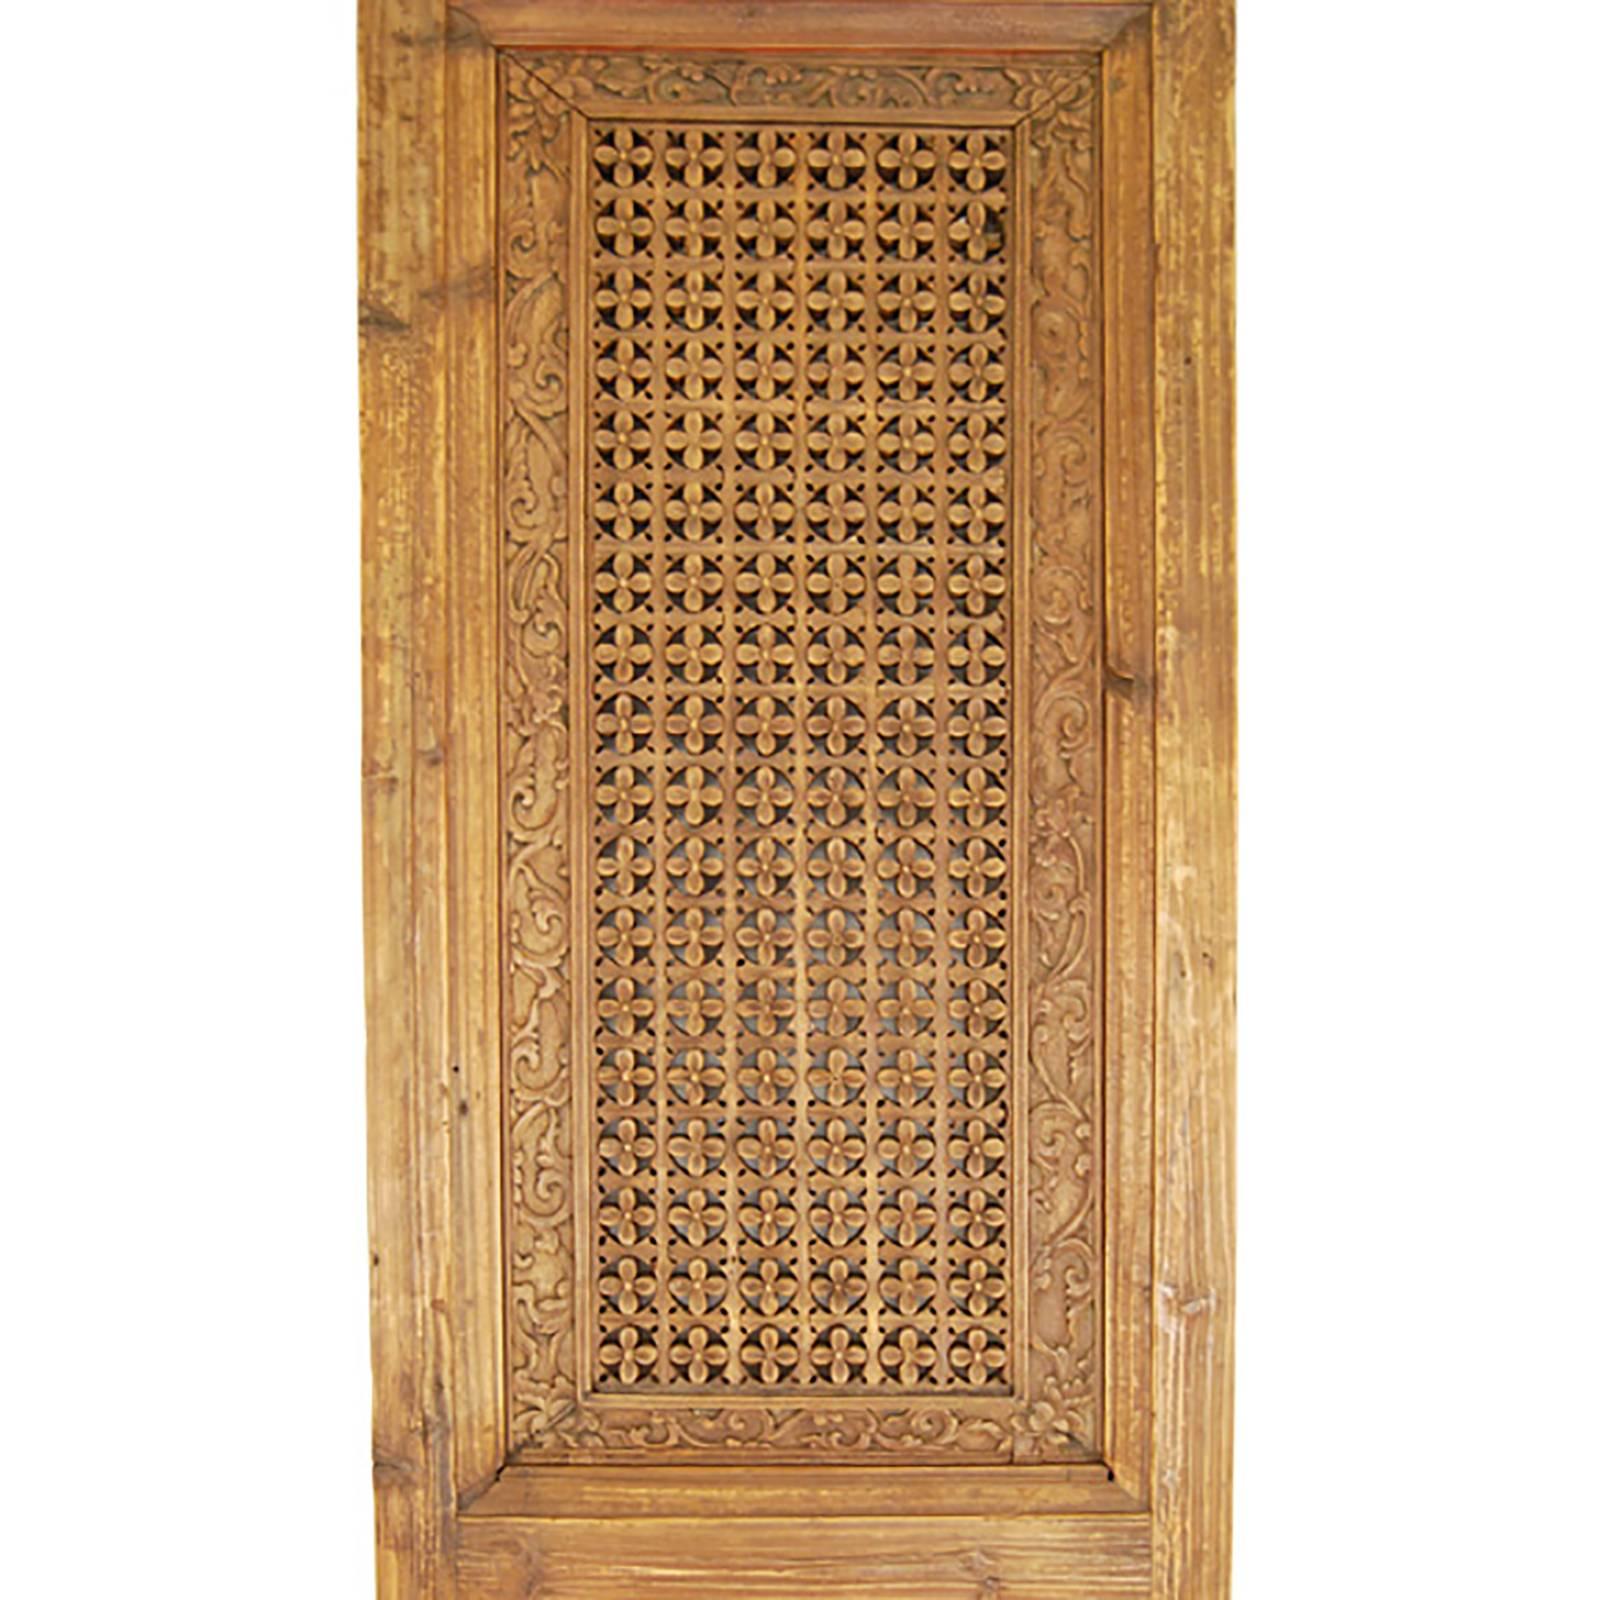 This pair of 19th century Chinese doors evokes life in an aristocratic Chinese courtyard home. Creating this tight floral lattice pattern was like putting a puzzle together; very different from making fretwork by carving or perforating a solid